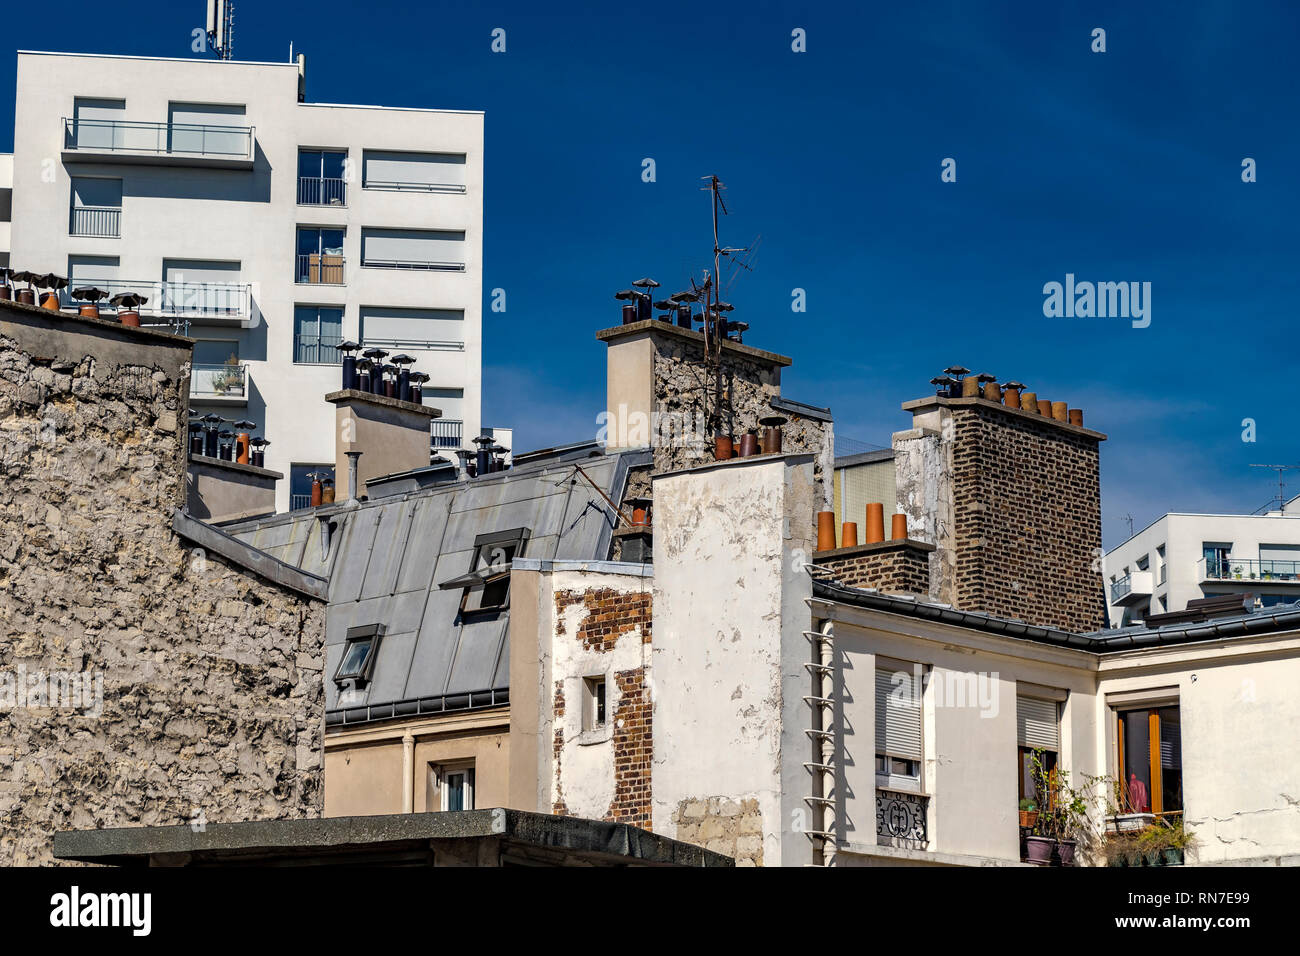 Paris building with attic rooms, tall chimney stacks and grey slate roof tiles  , Paris, France Stock Photo